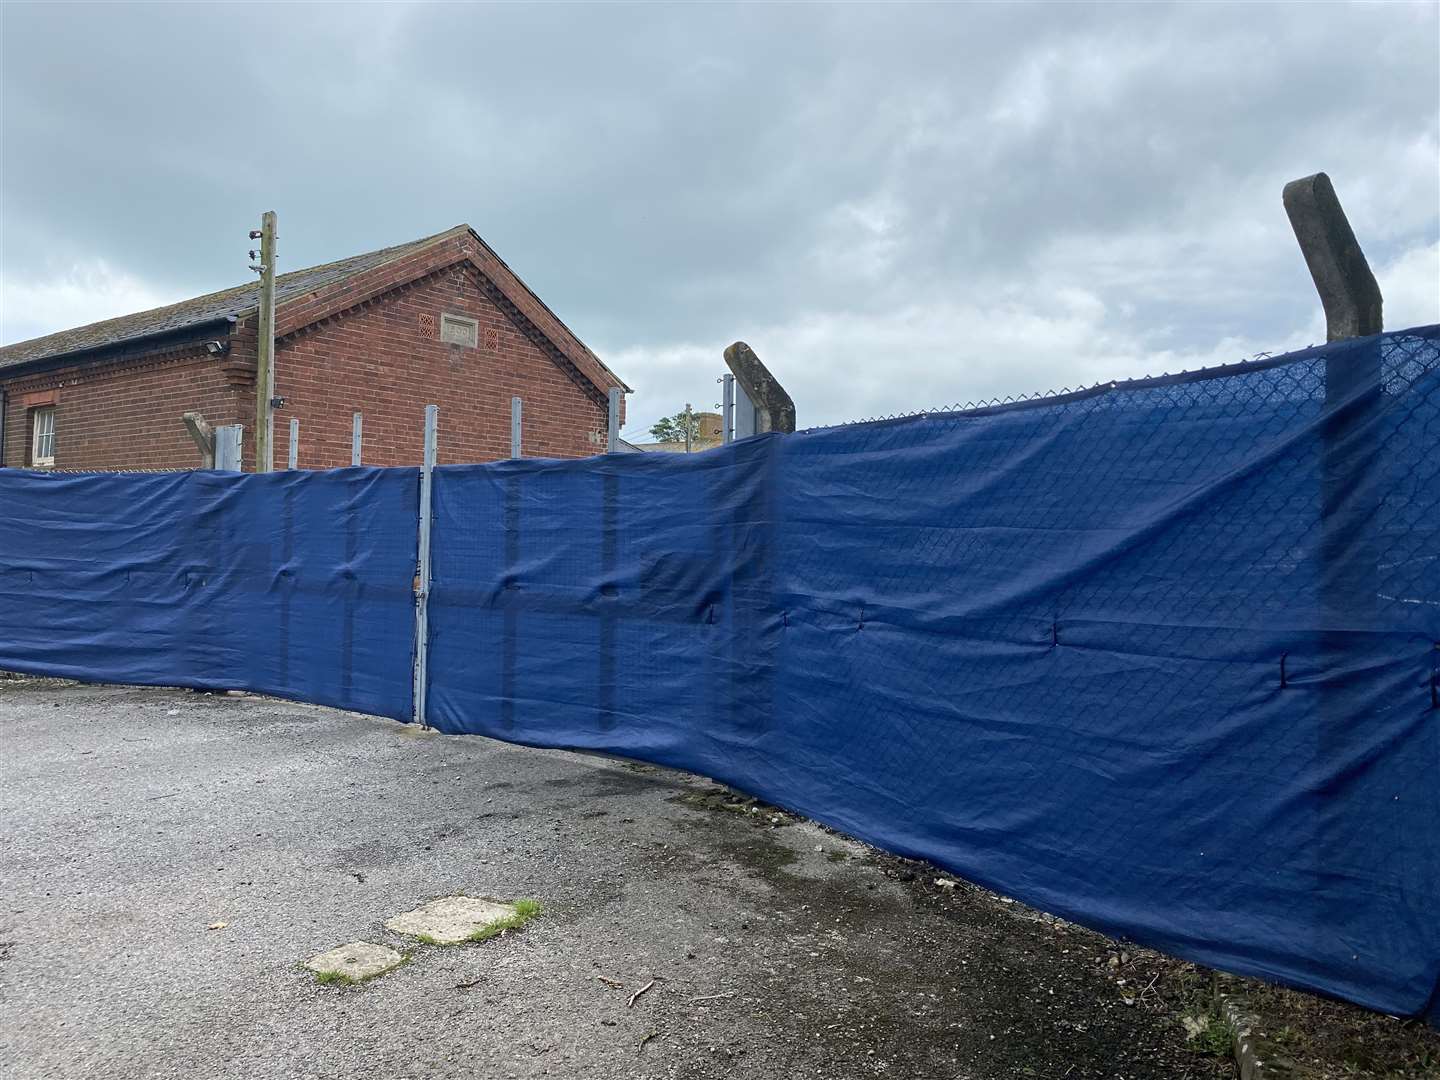 Latest photo from outside Napier Barracks. Blue plastic has been put around the fence